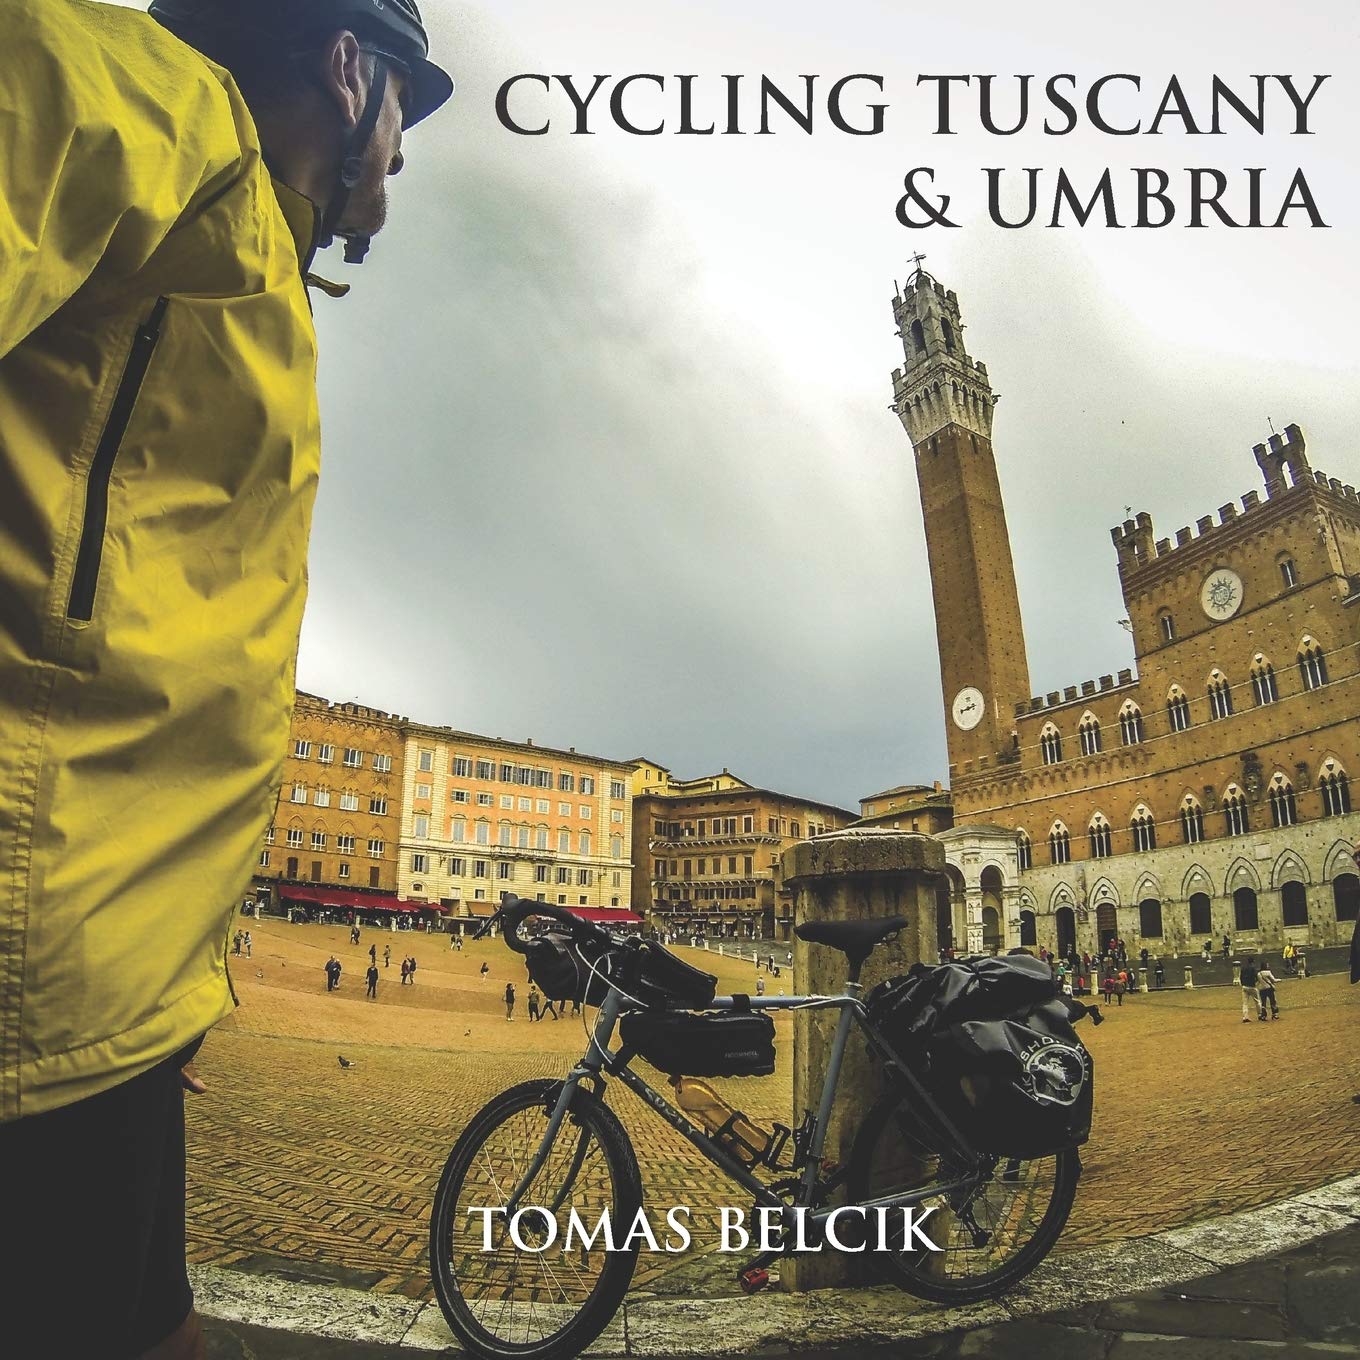 Cycling Tuscany & Umbria: Discover the epic roads of the wine-growing region of Chianti. Sample the gravel roads of L’Eroica. Climb the magic hill ... (Europe Travel Guides, World-by-Bike Series)